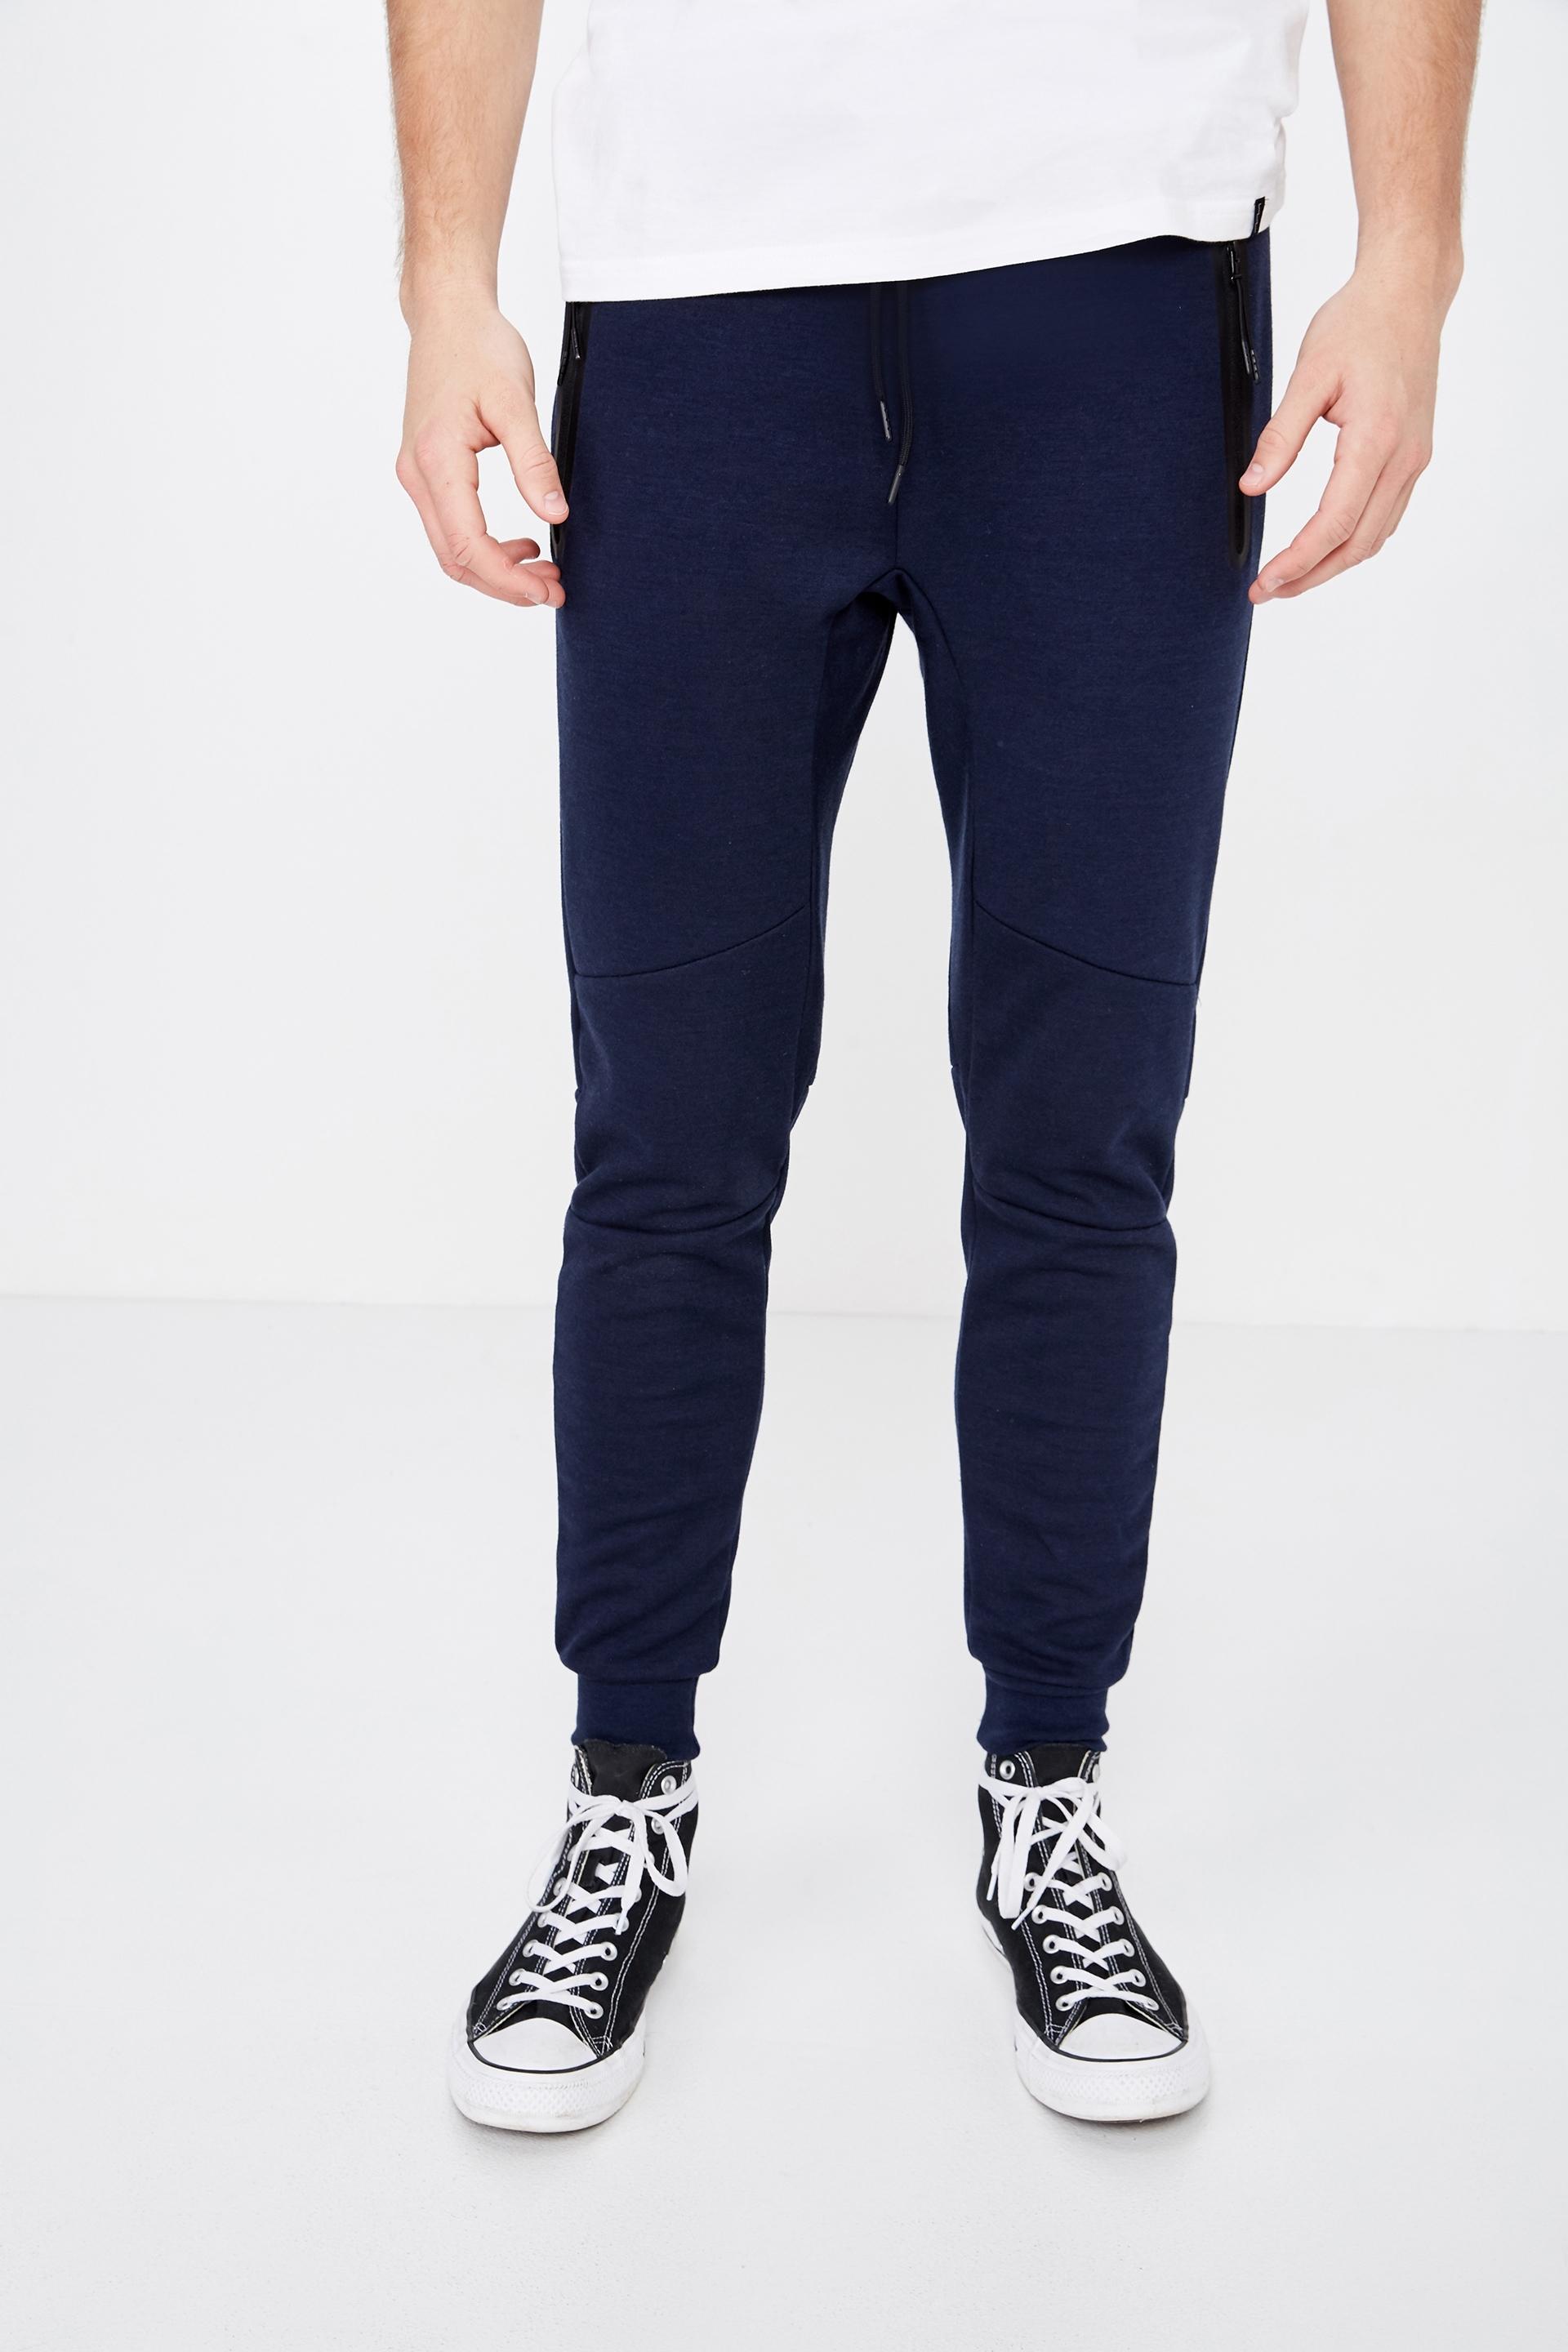 Tech track pant - navy Factorie Pants & Chinos | Superbalist.com